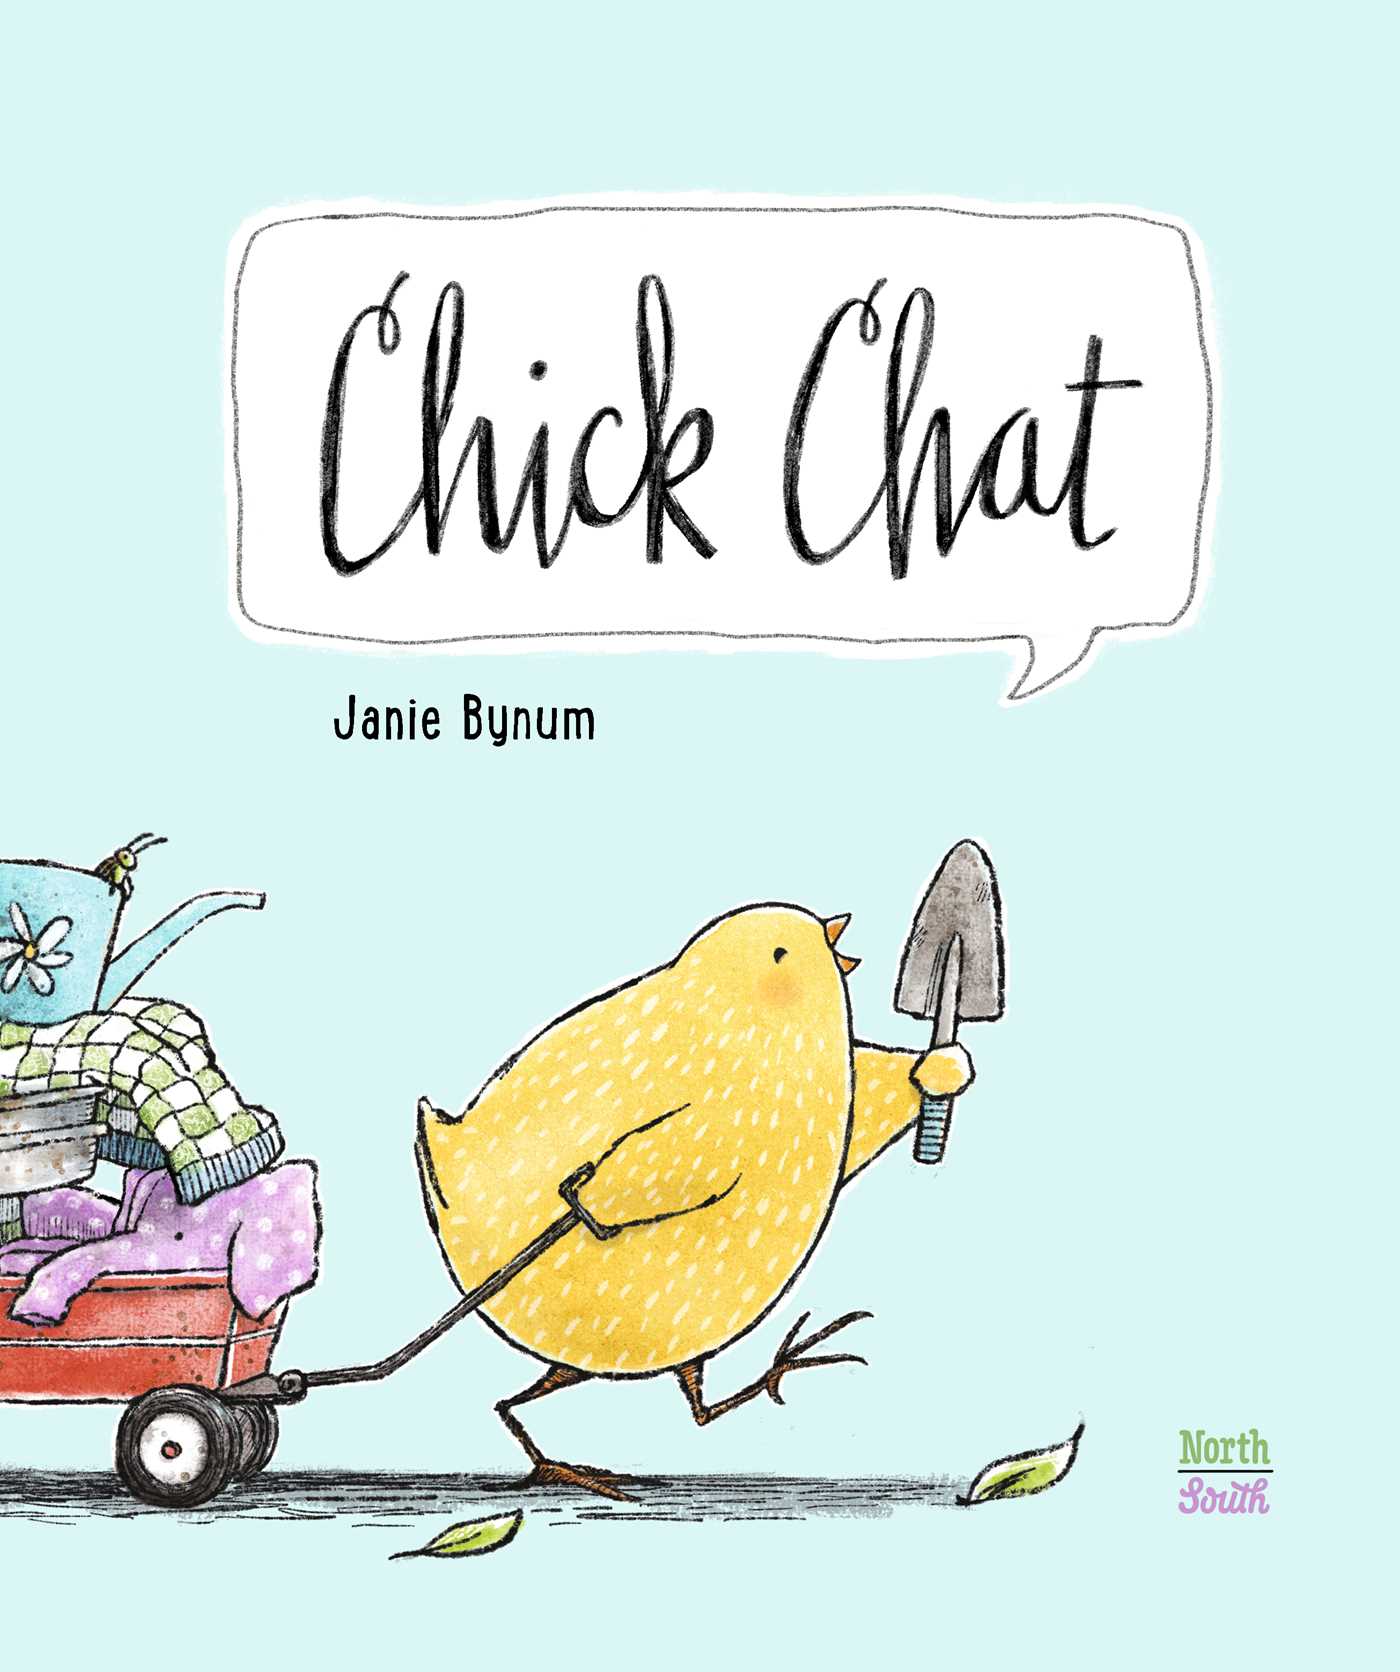 Chick Chat